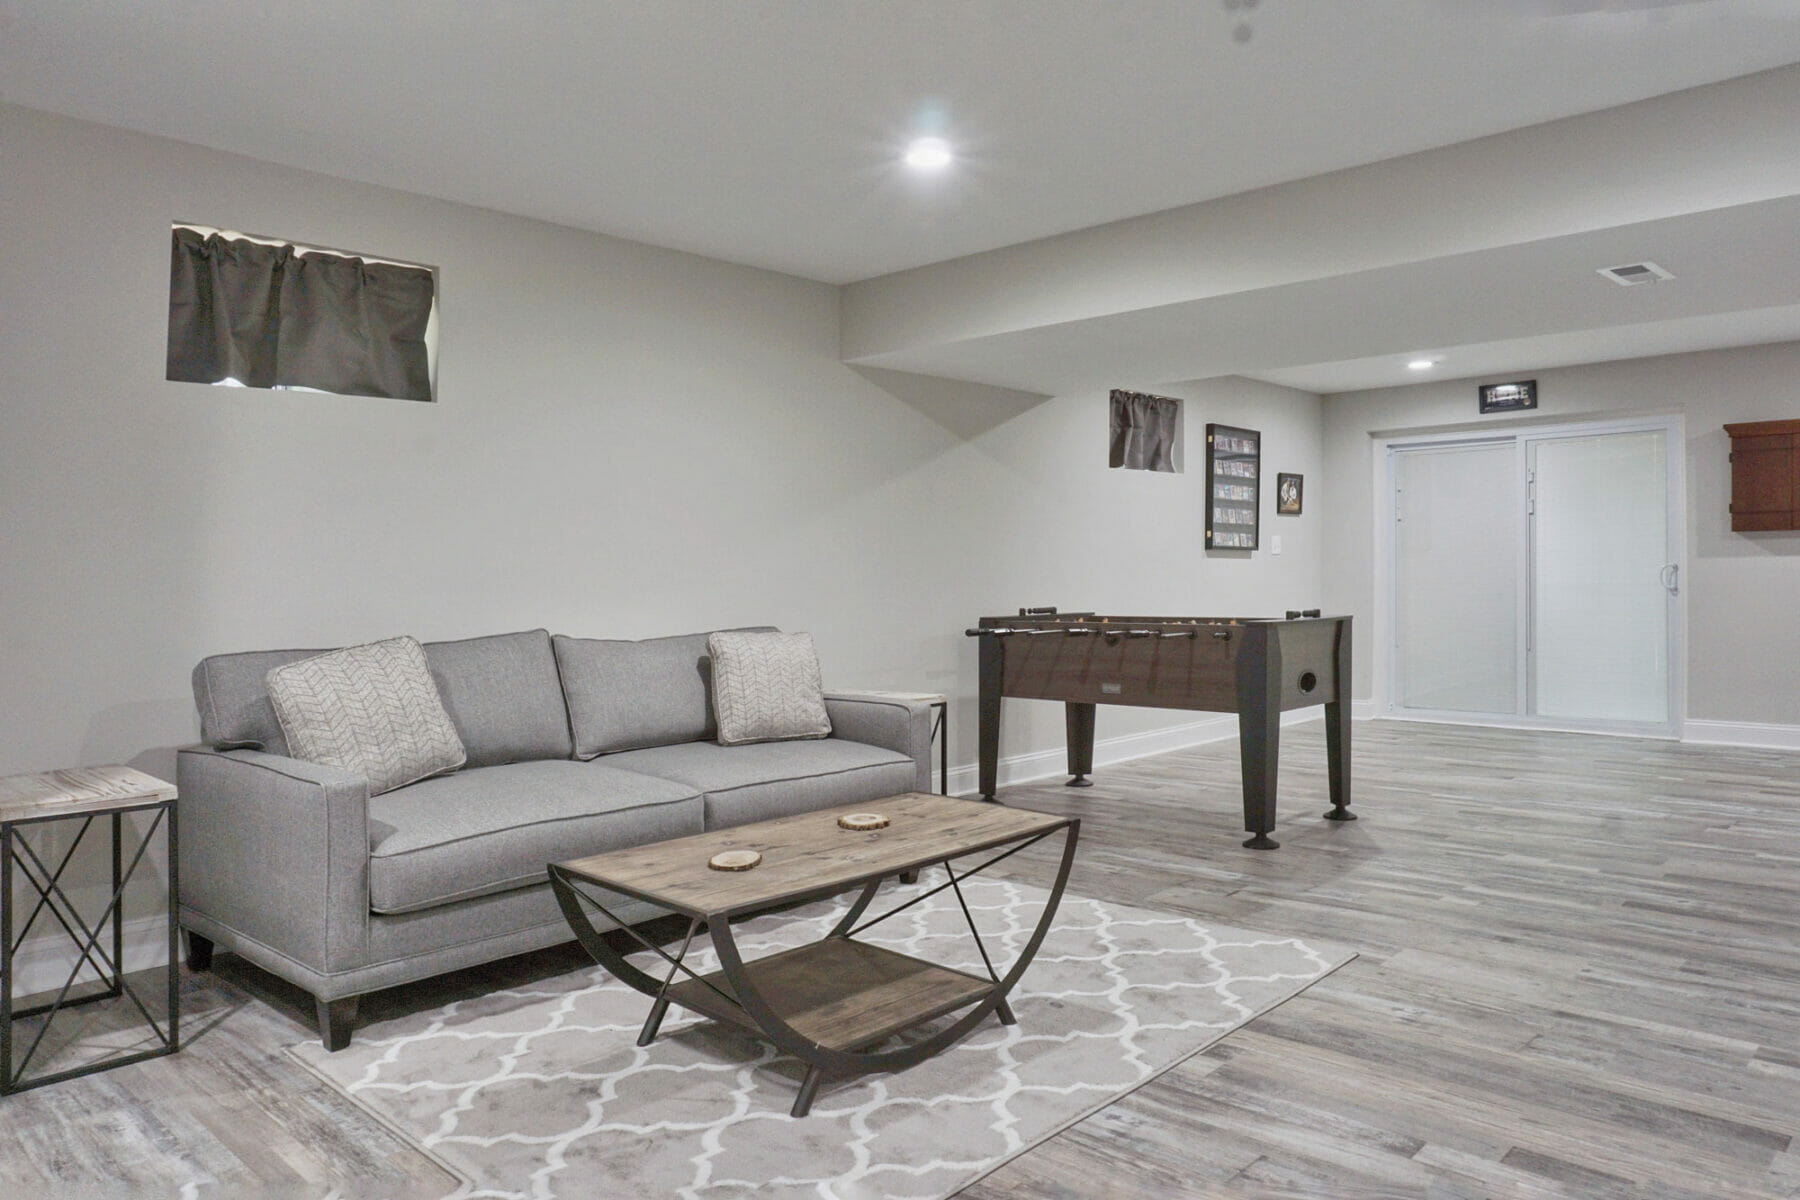 How to Turn Your Old Basement into a Rentable Living Space